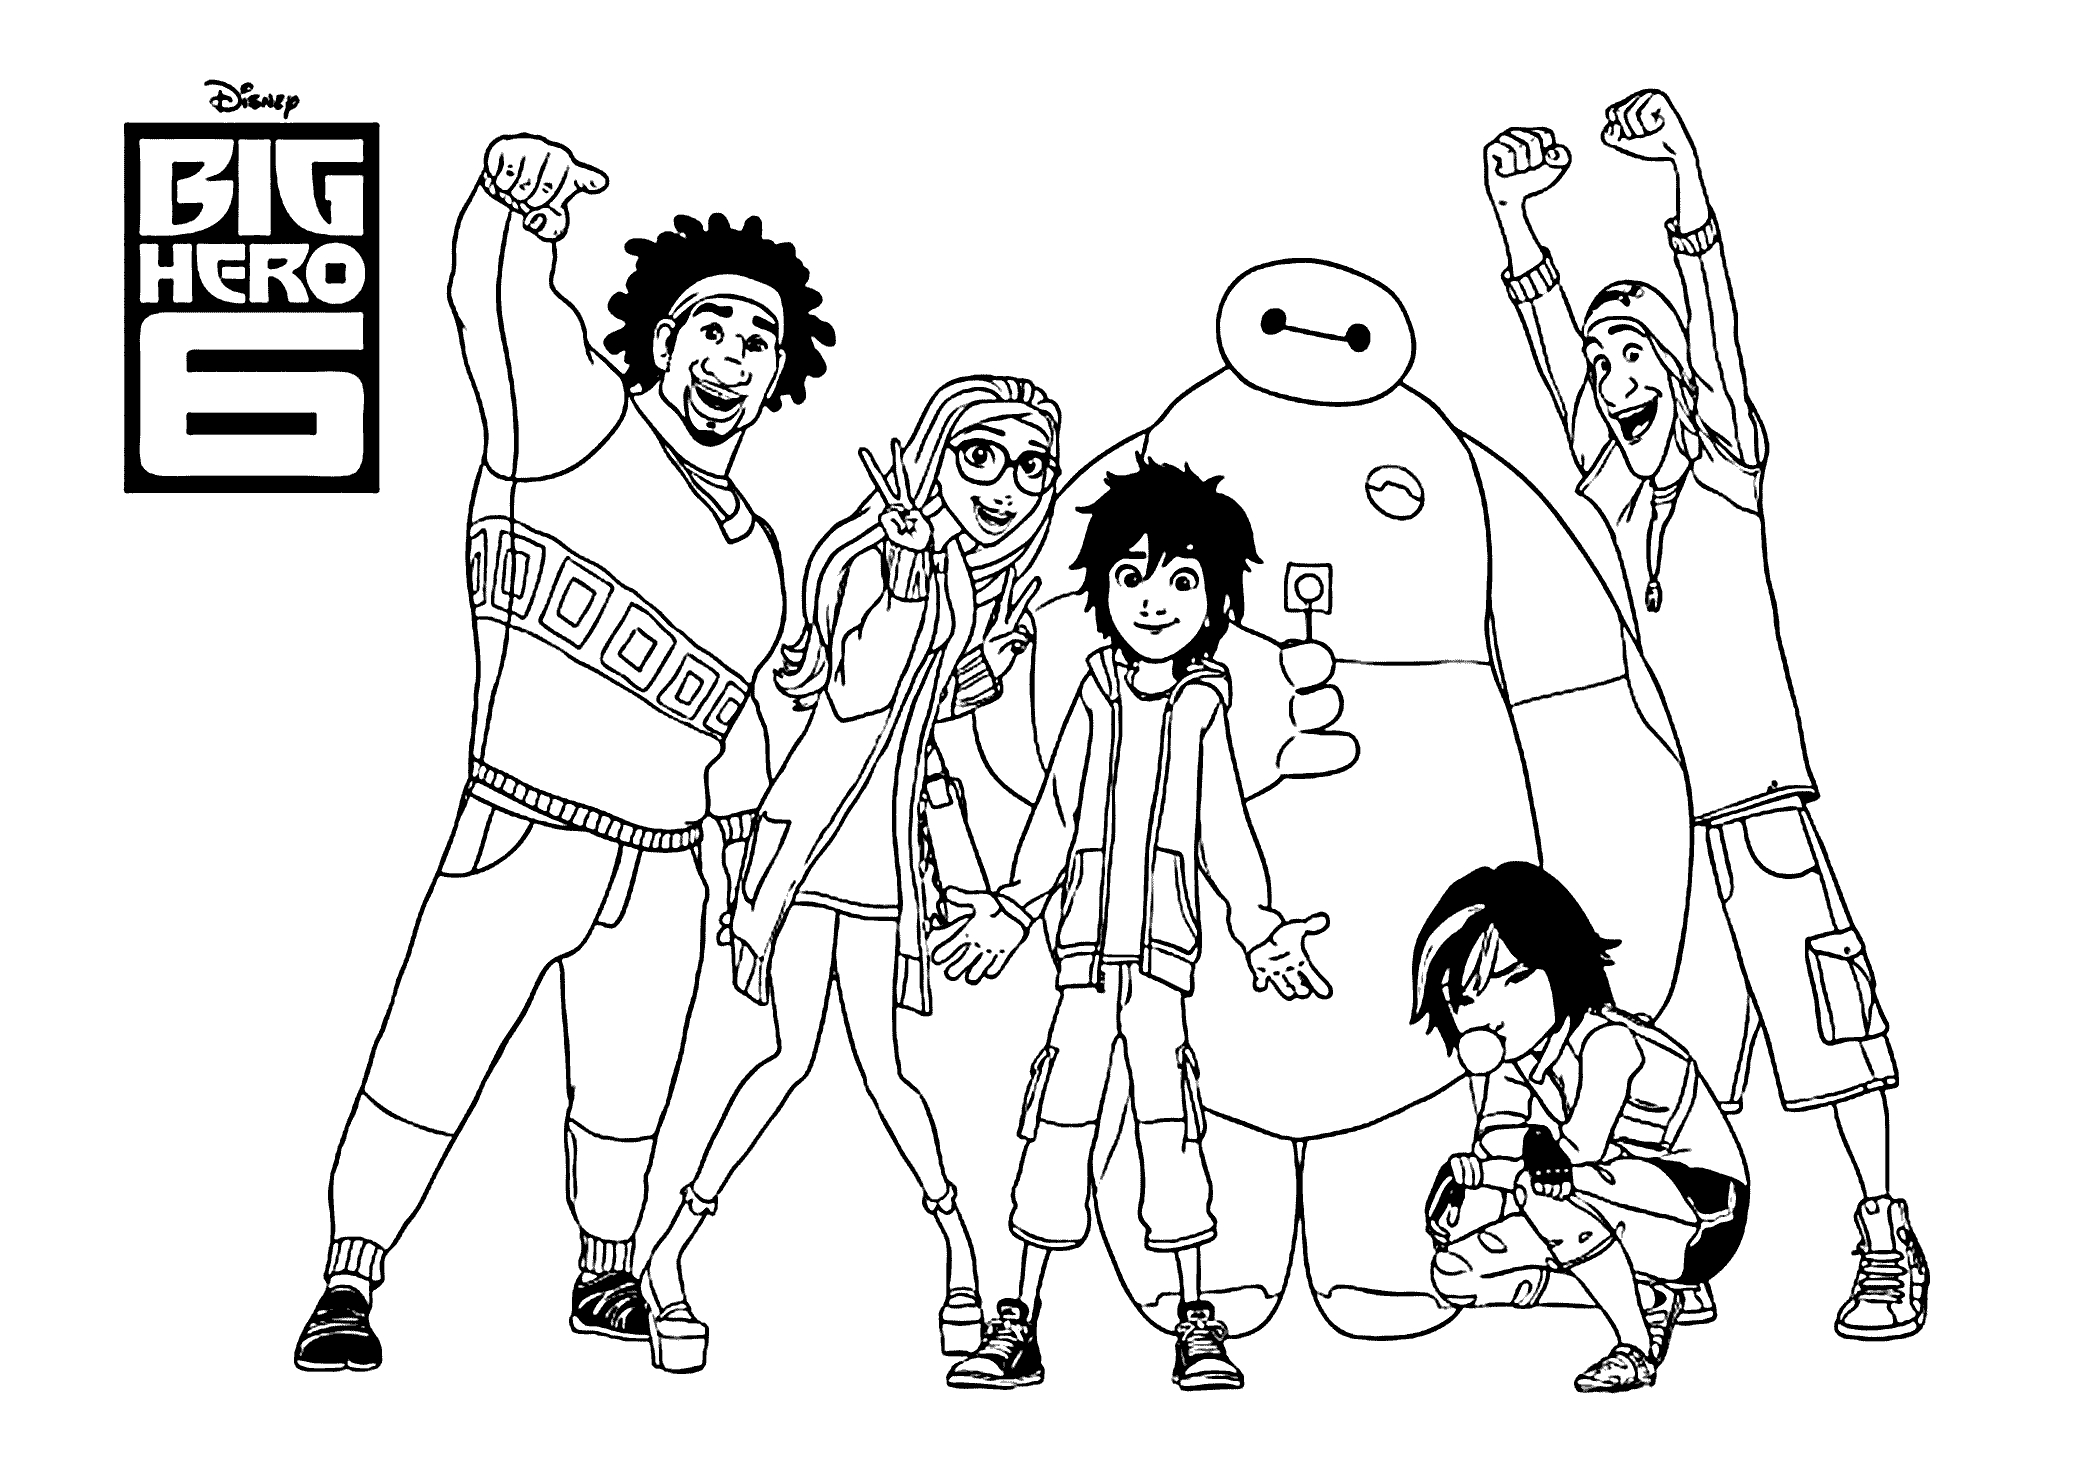 big hero 6 free coloring pages disney movie big hero 6 colouring pages free to print coloring 6 hero big free pages 